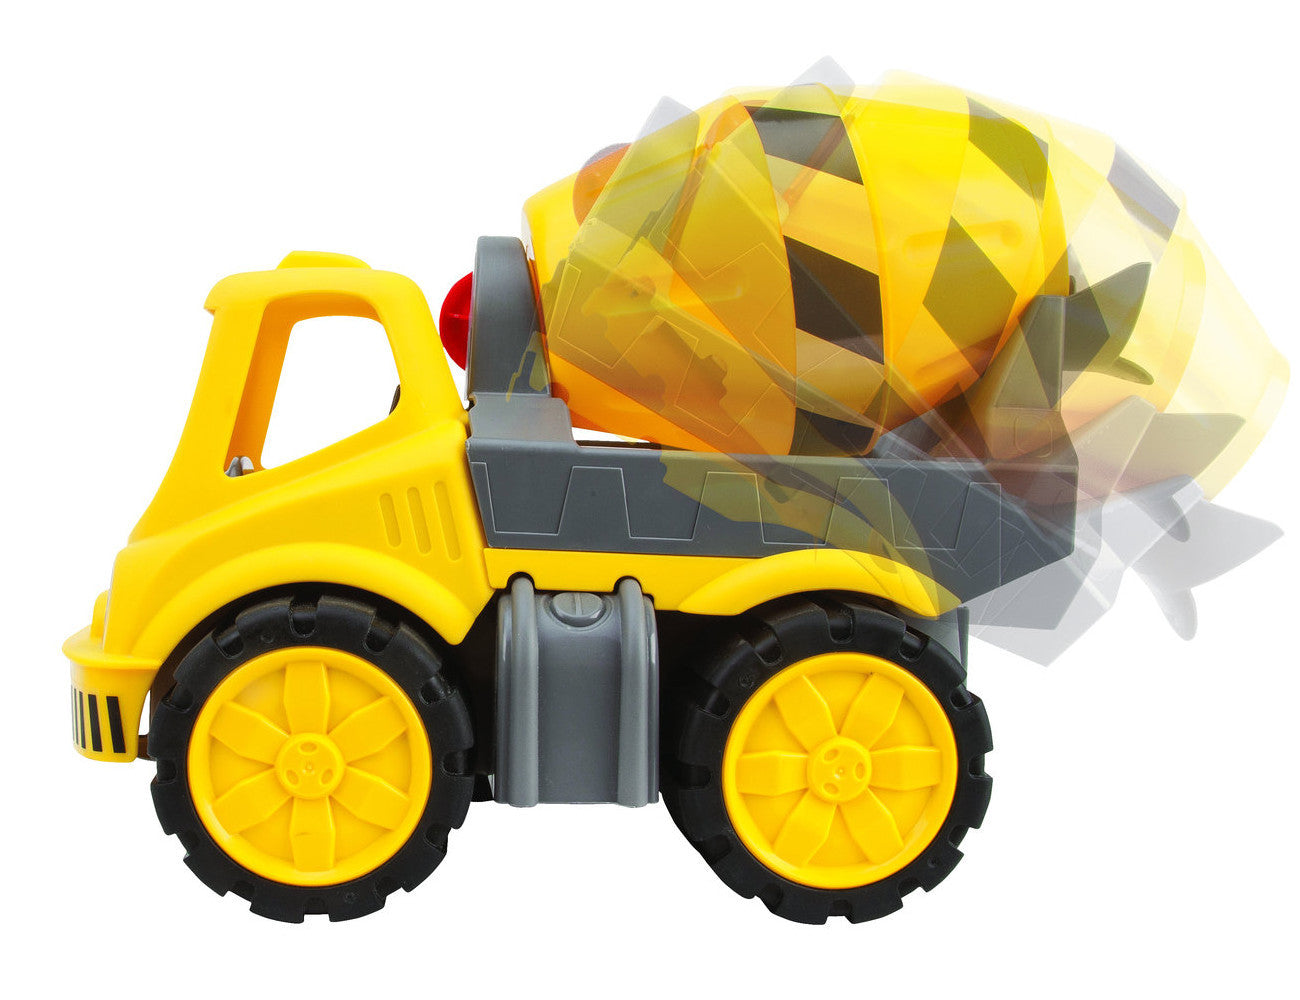 BIG Truck Cement Mixer Power Worker - K and K Creative Toys